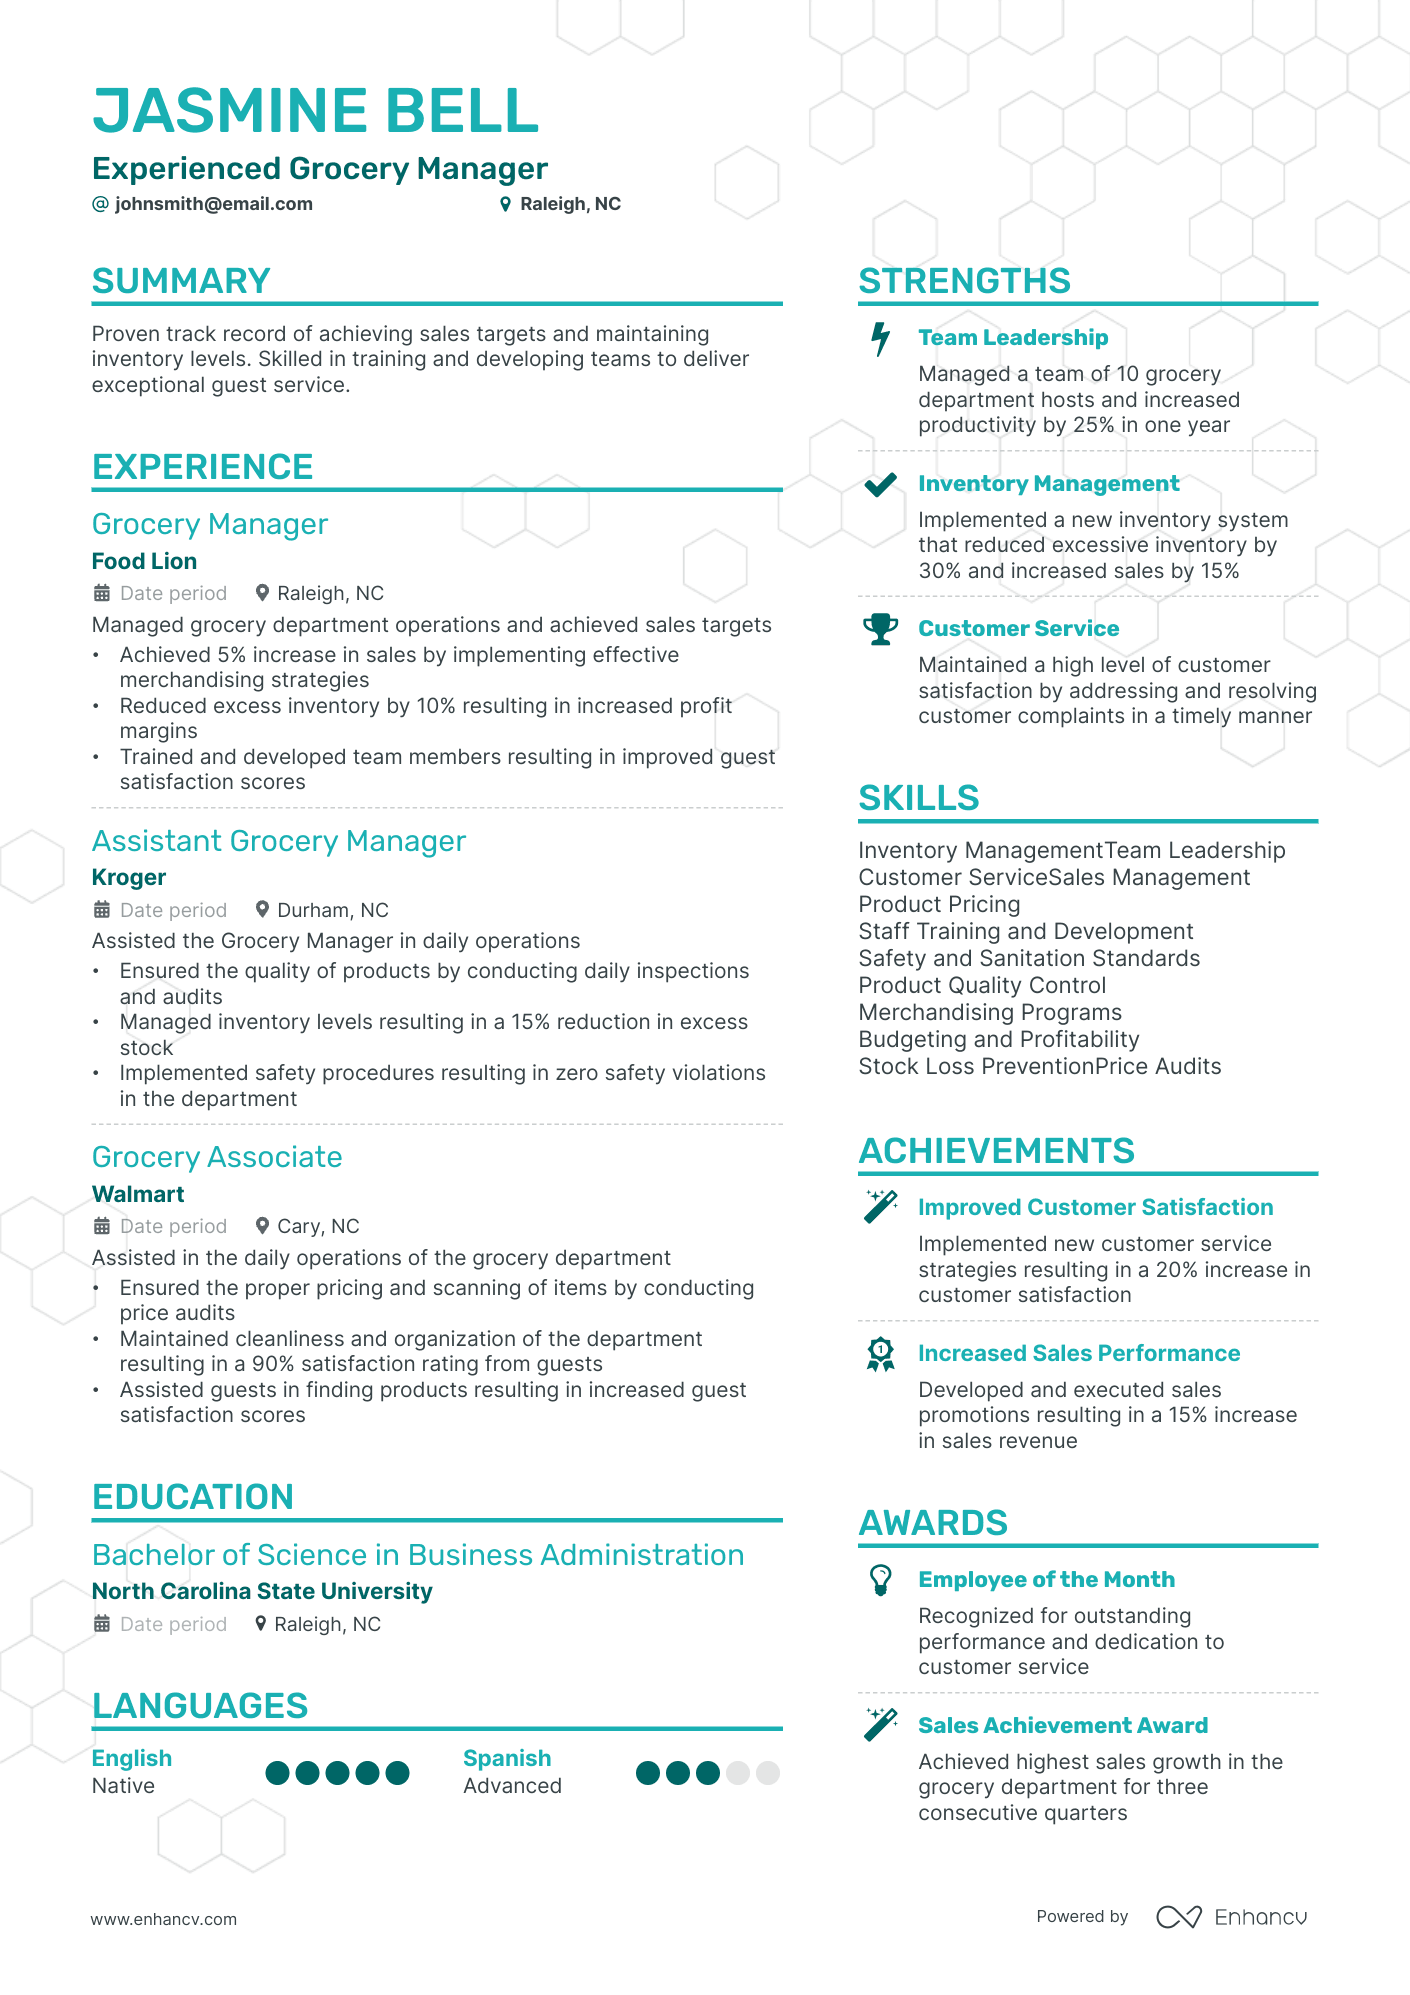 Grocery Manager resume example